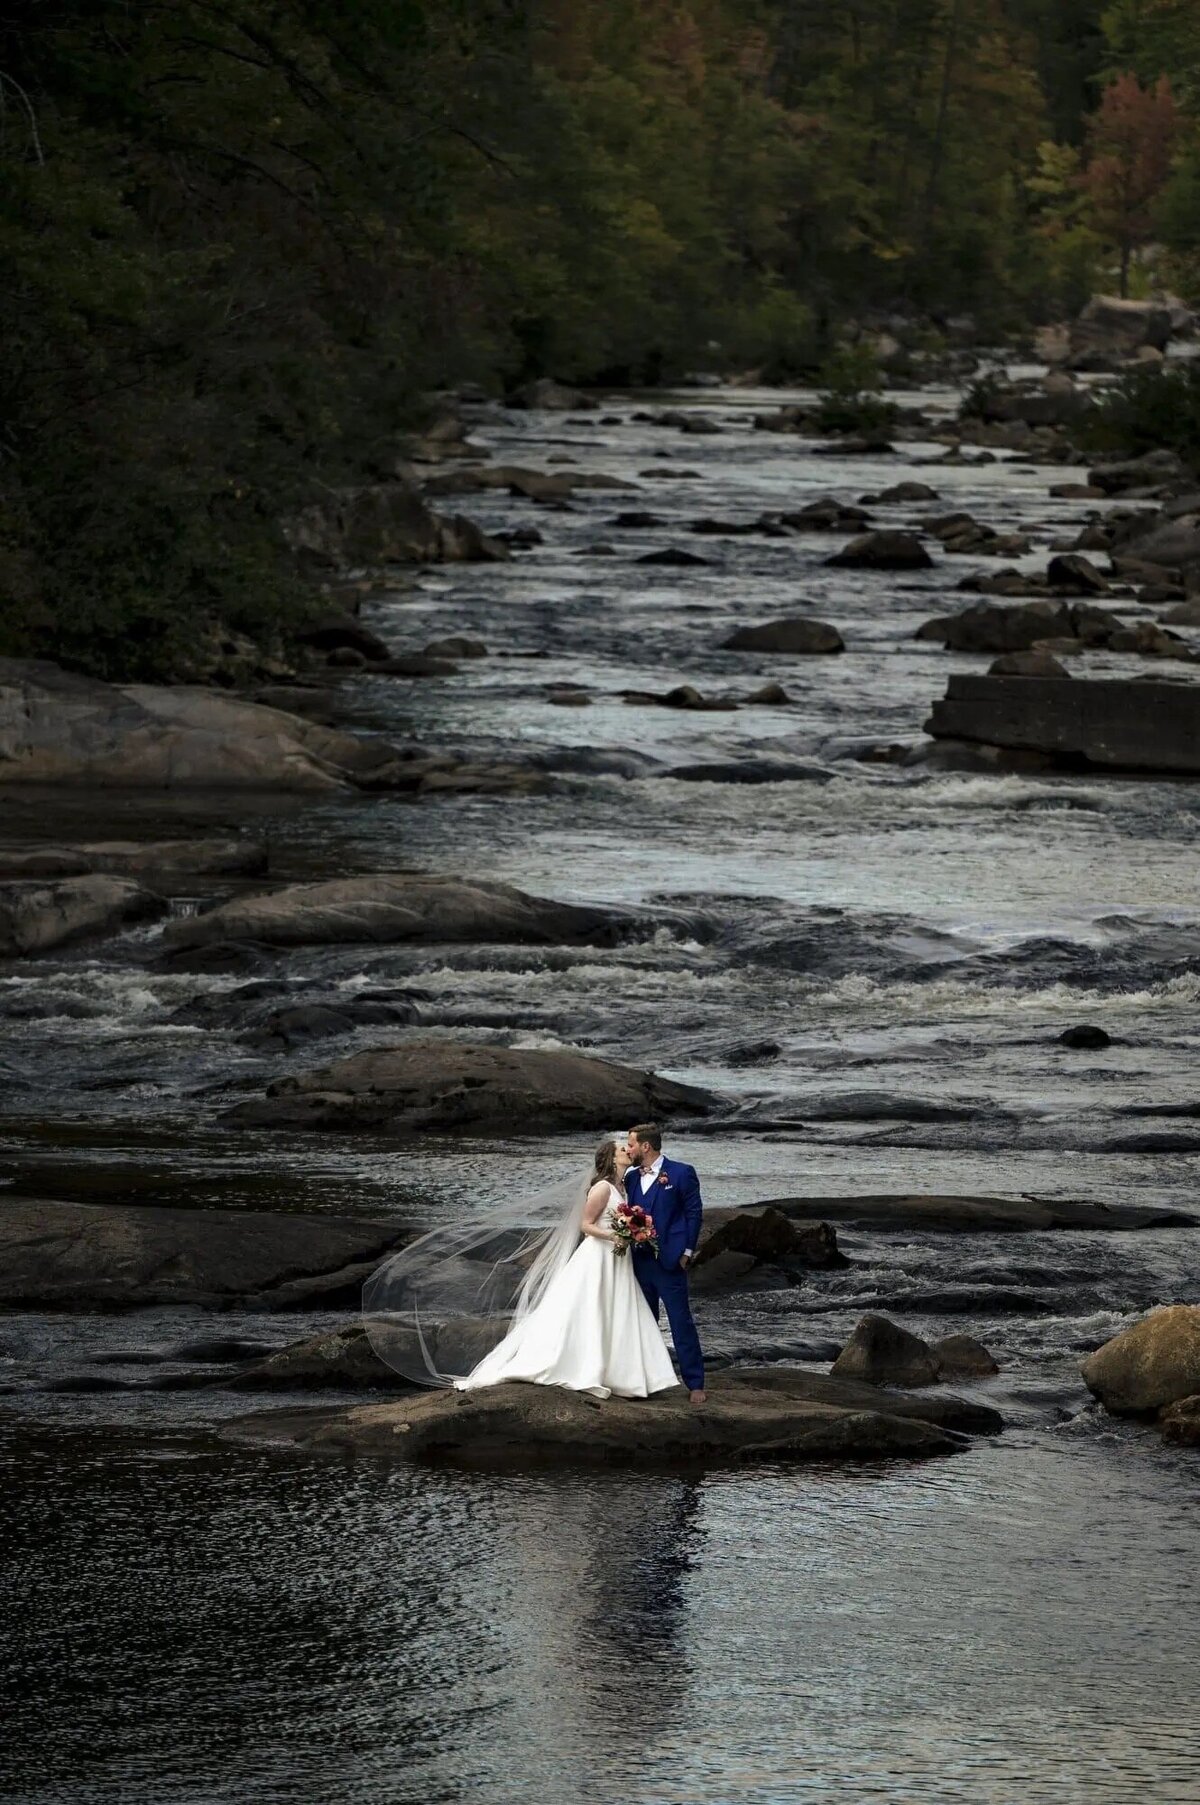 A bride and groom stand on a rock in the middle of a gently flowing river, surrounded by the tranquility of nature, encapsulating a moment of peaceful solitude.